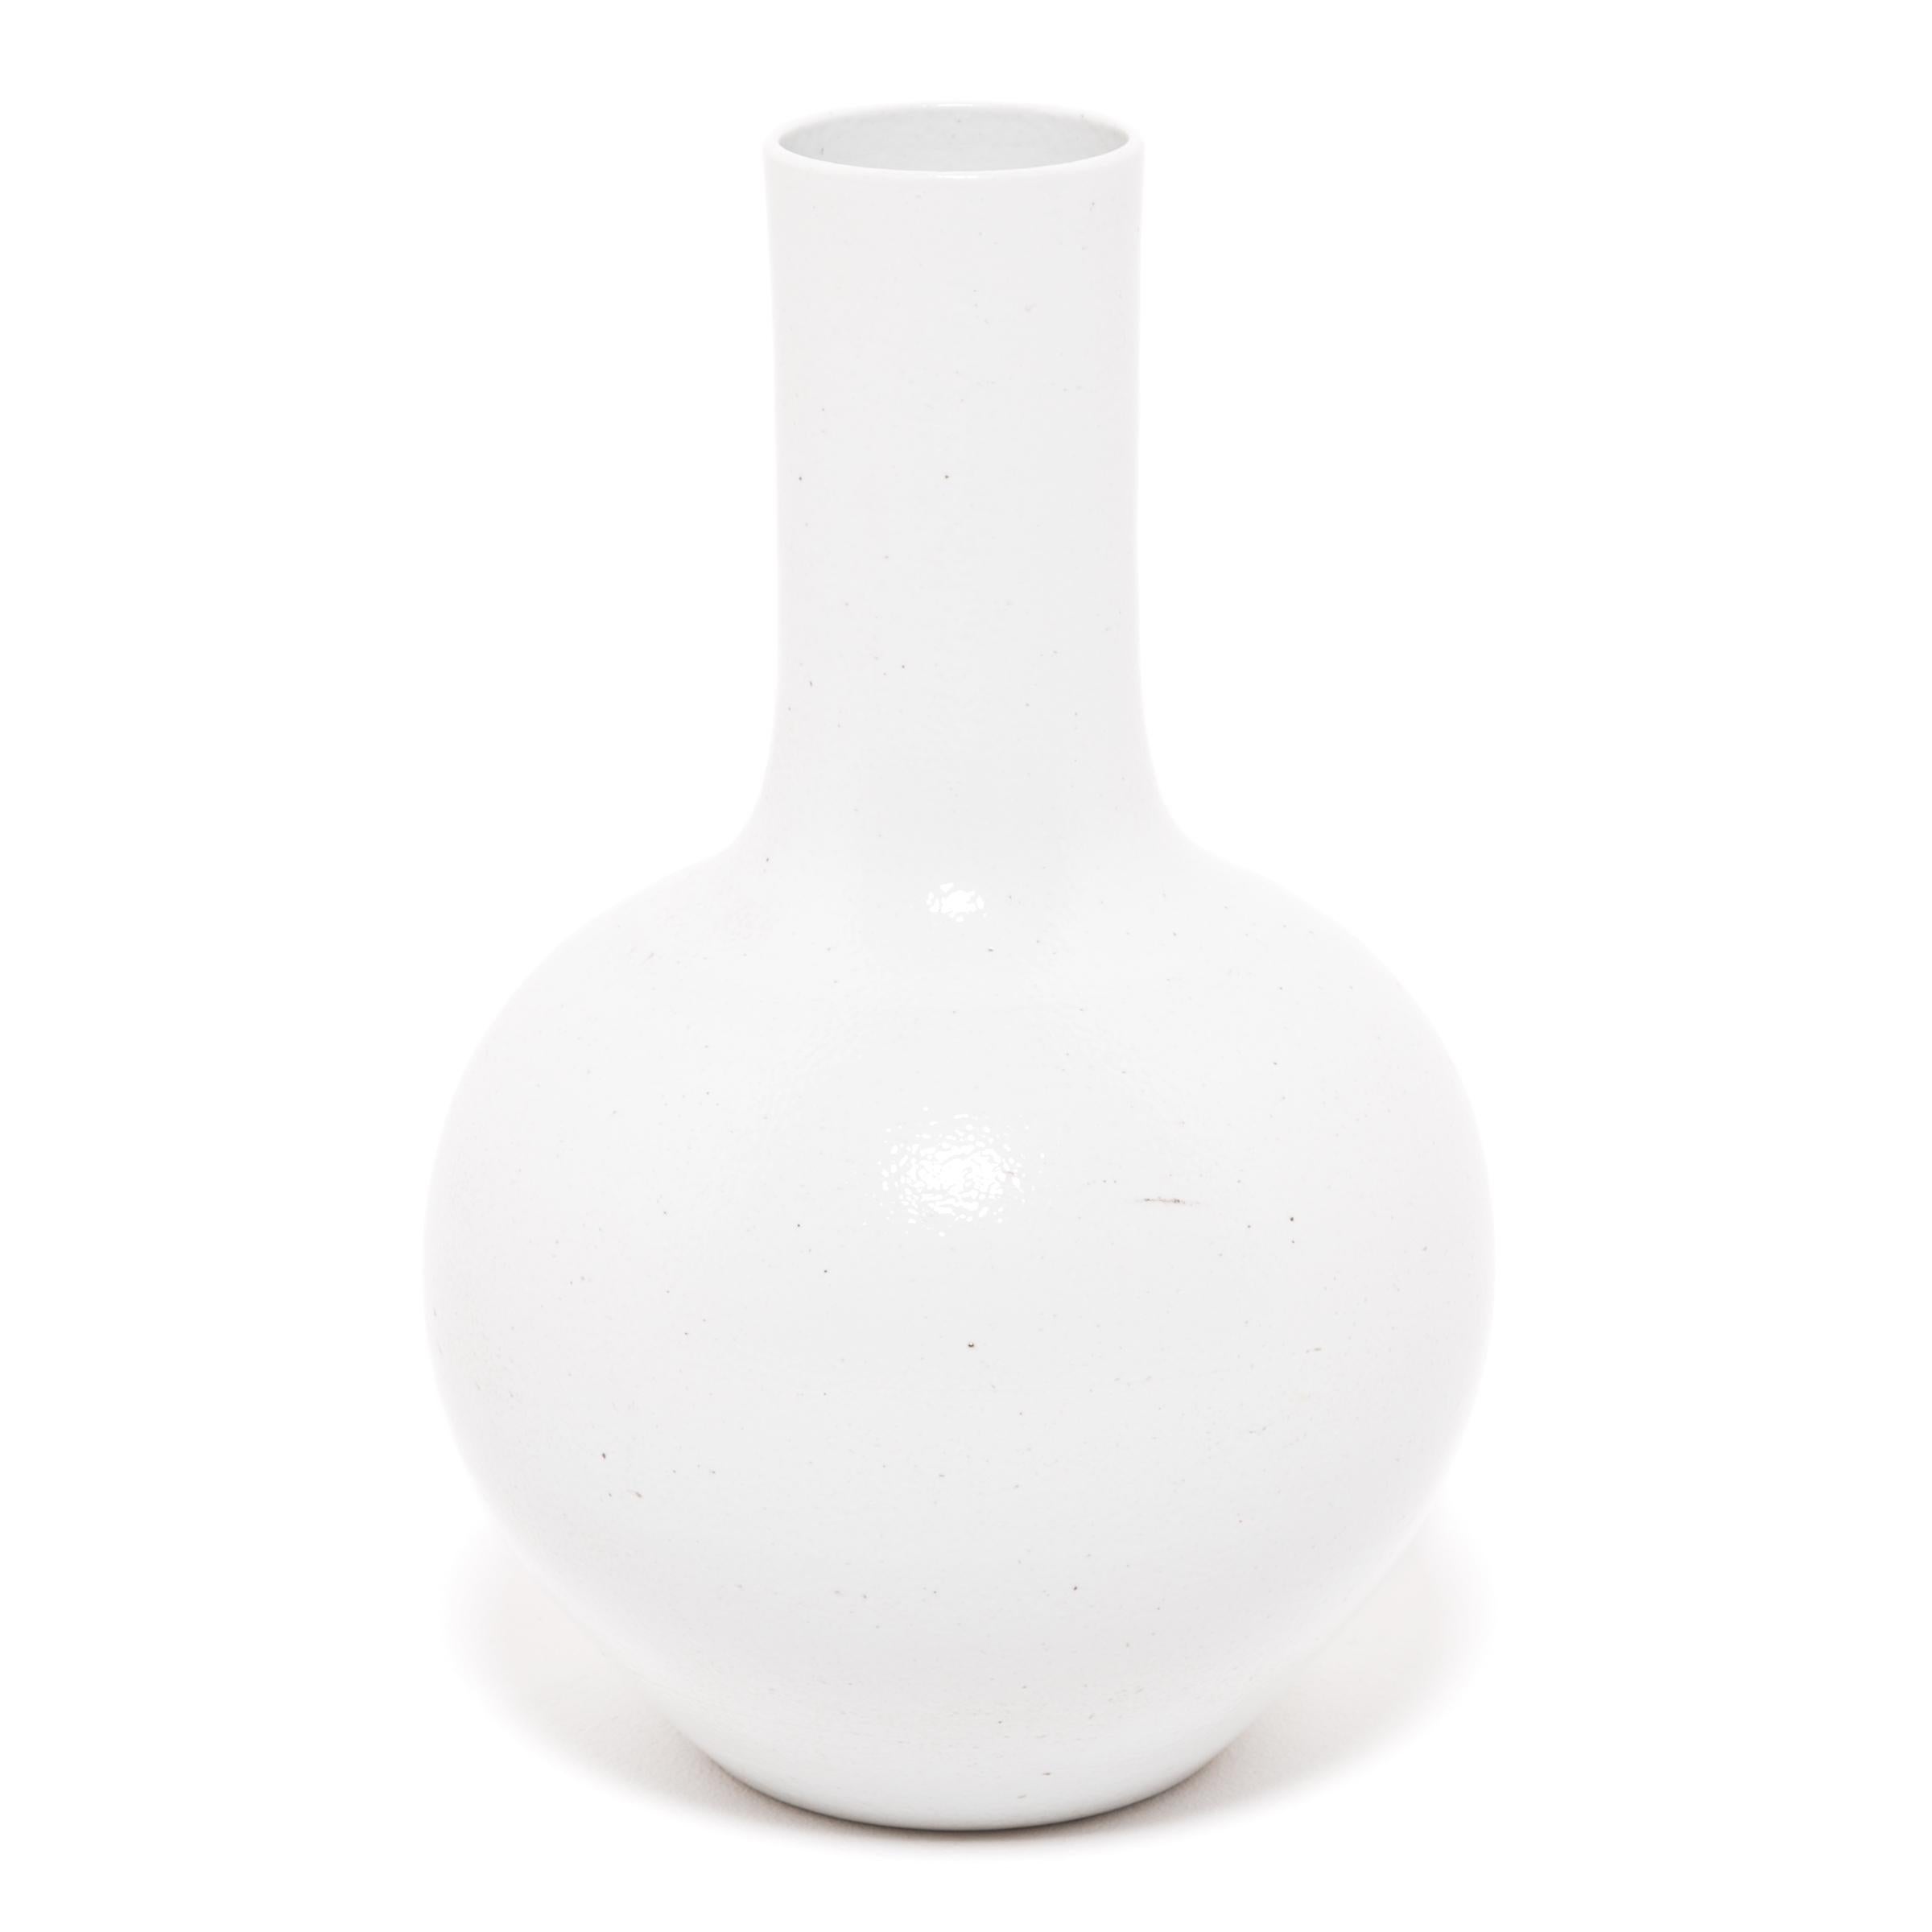 Drawing on a long Chinese tradition of ceramics, this striking long-necked vase is glazed in serene, cloud-inspired white. Sculpted by artisans in China's Zhejiang province, this contemporary vase reinterprets a traditional shape with clean lines